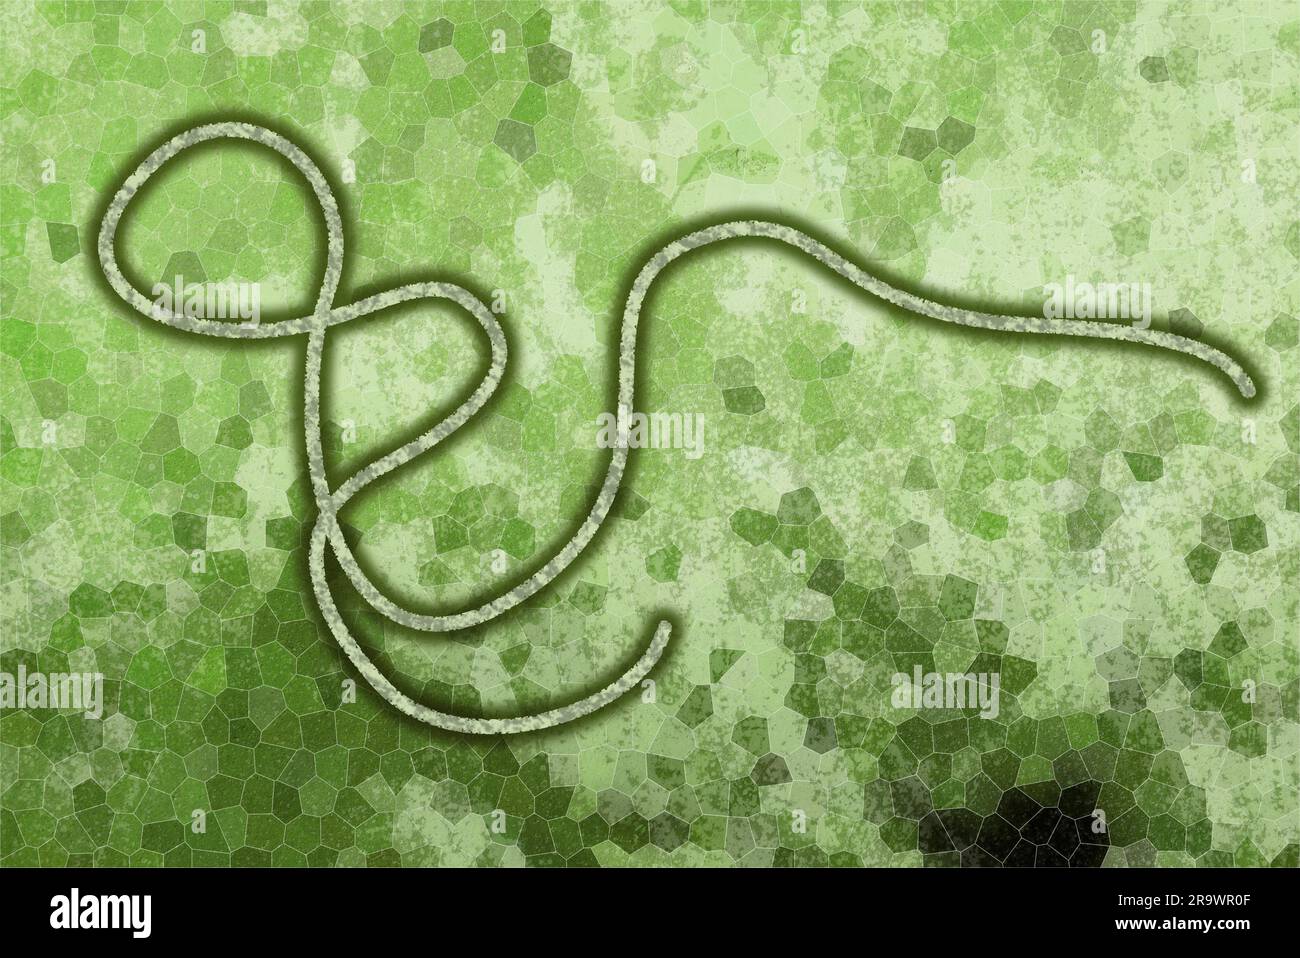 Graphic representation of the Ebola virus on green background Stock Photo